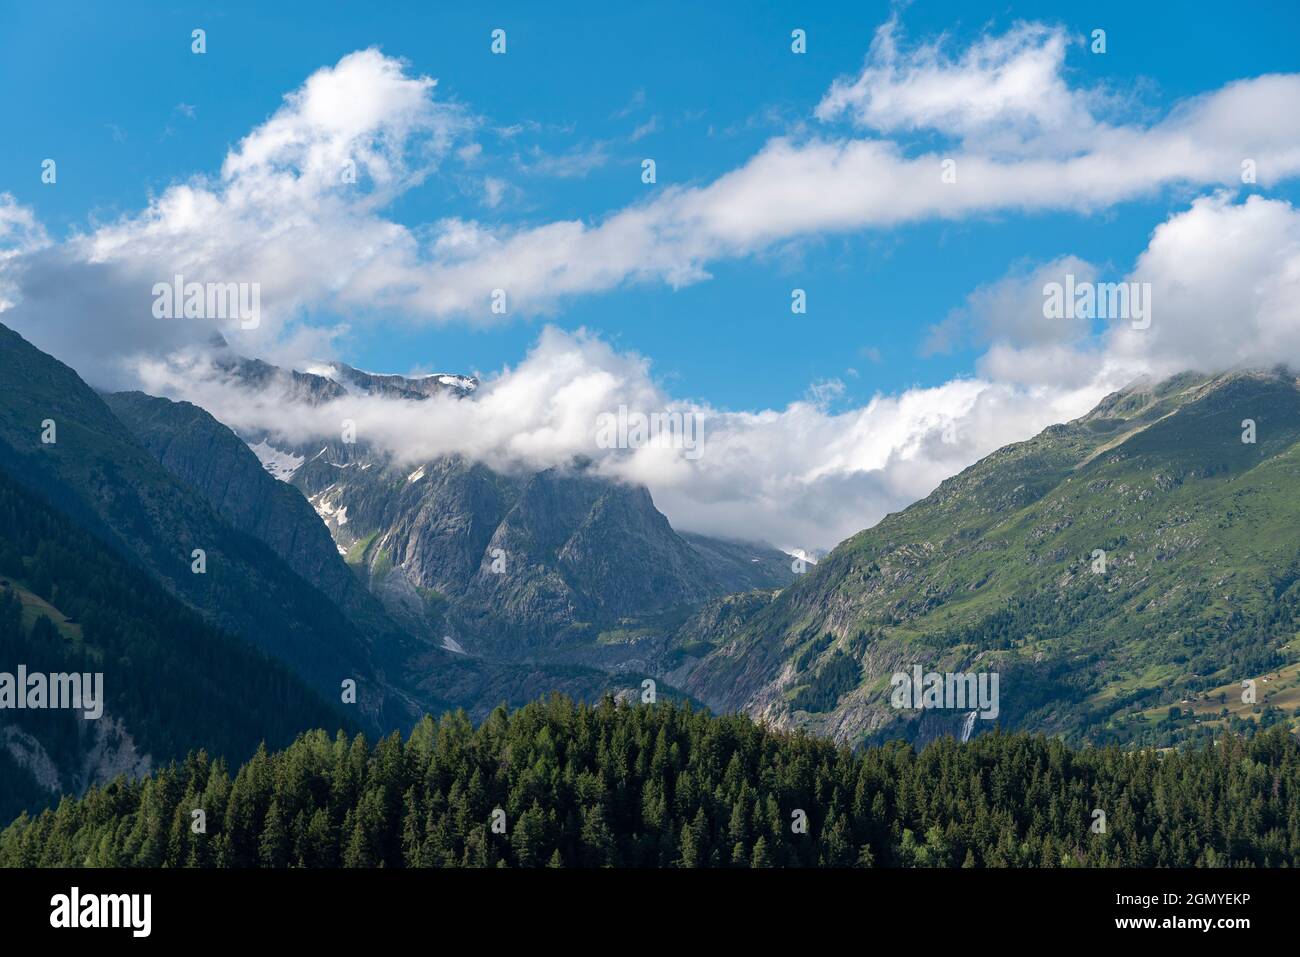 Landscape with the Wannenhorn group in background, Ernen, Valais, Switzerland, Europe Stock Photo